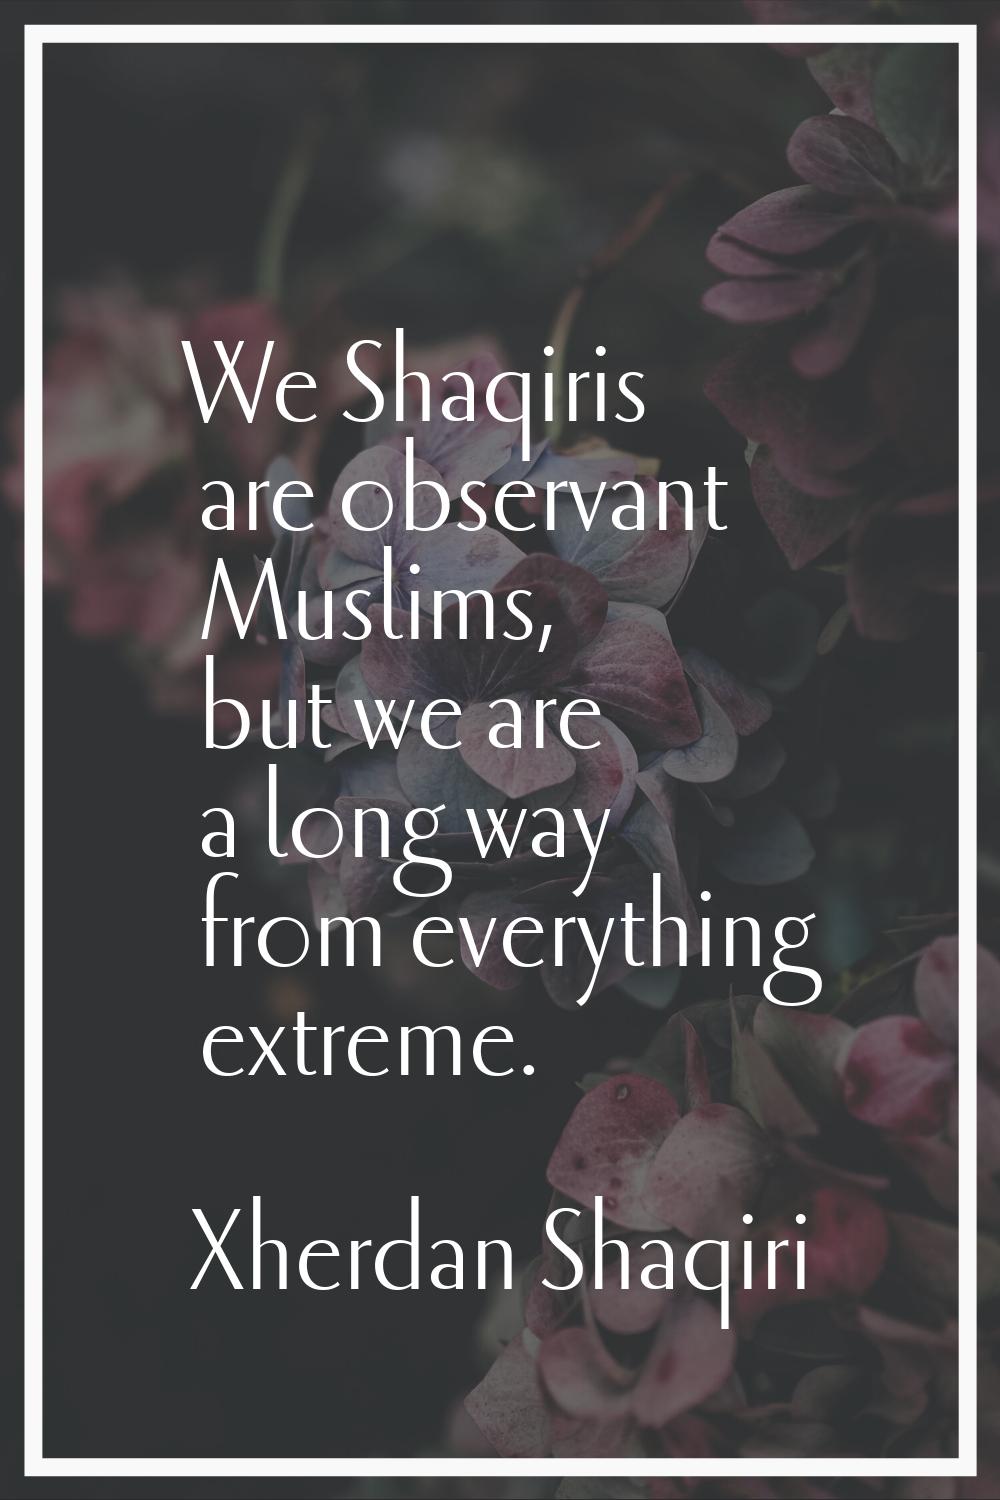 We Shaqiris are observant Muslims, but we are a long way from everything extreme.